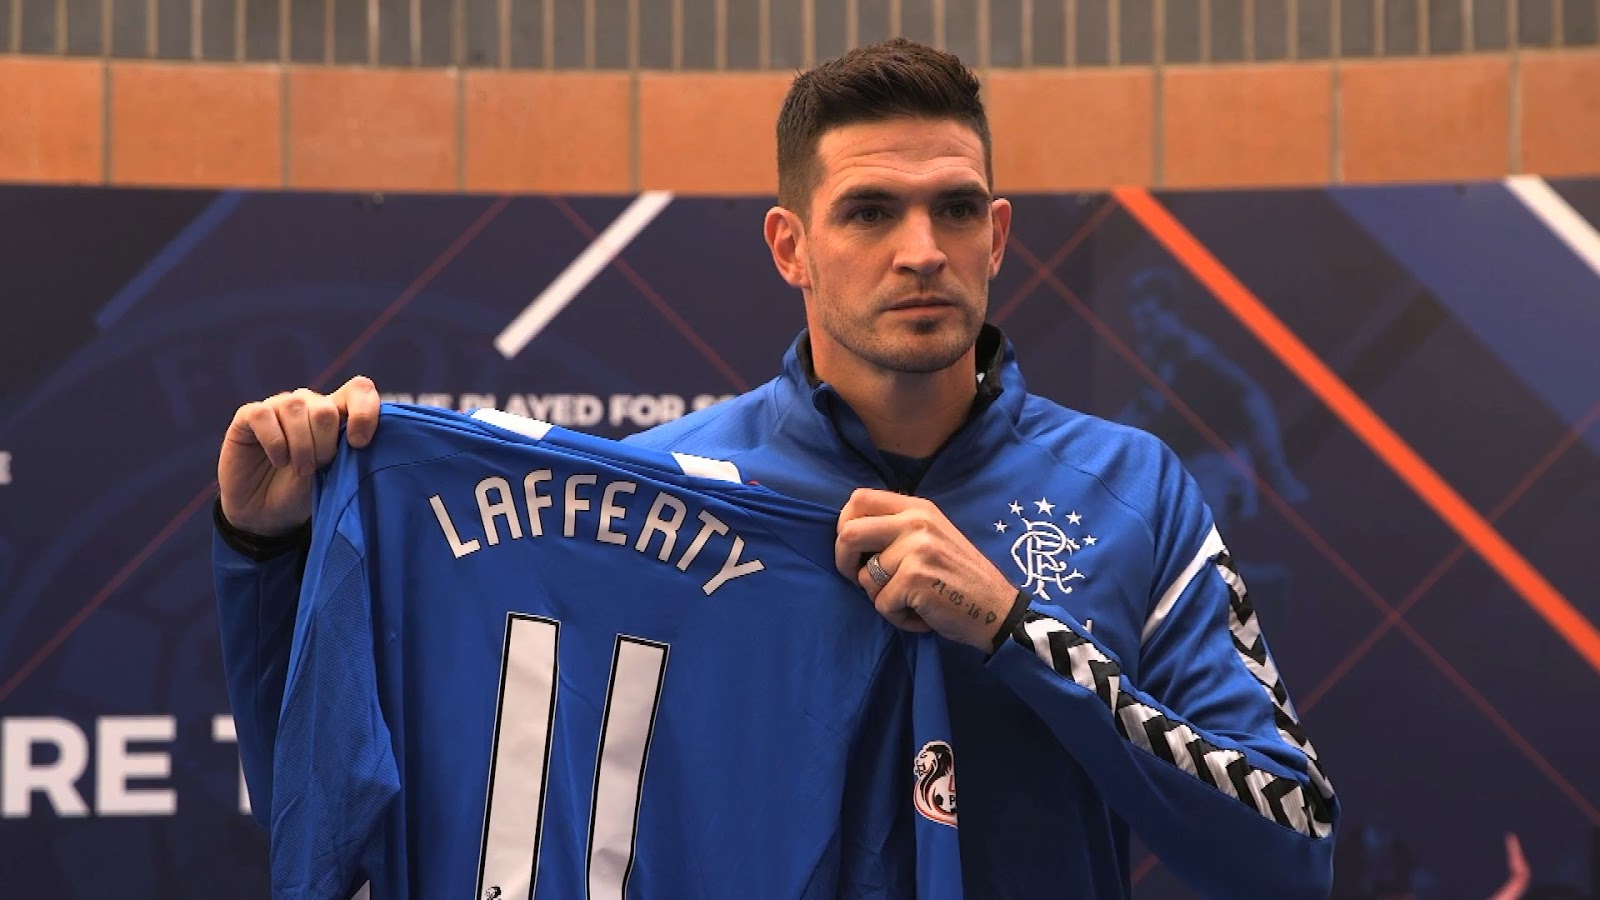 Kyle Lafferty; what went wrong?